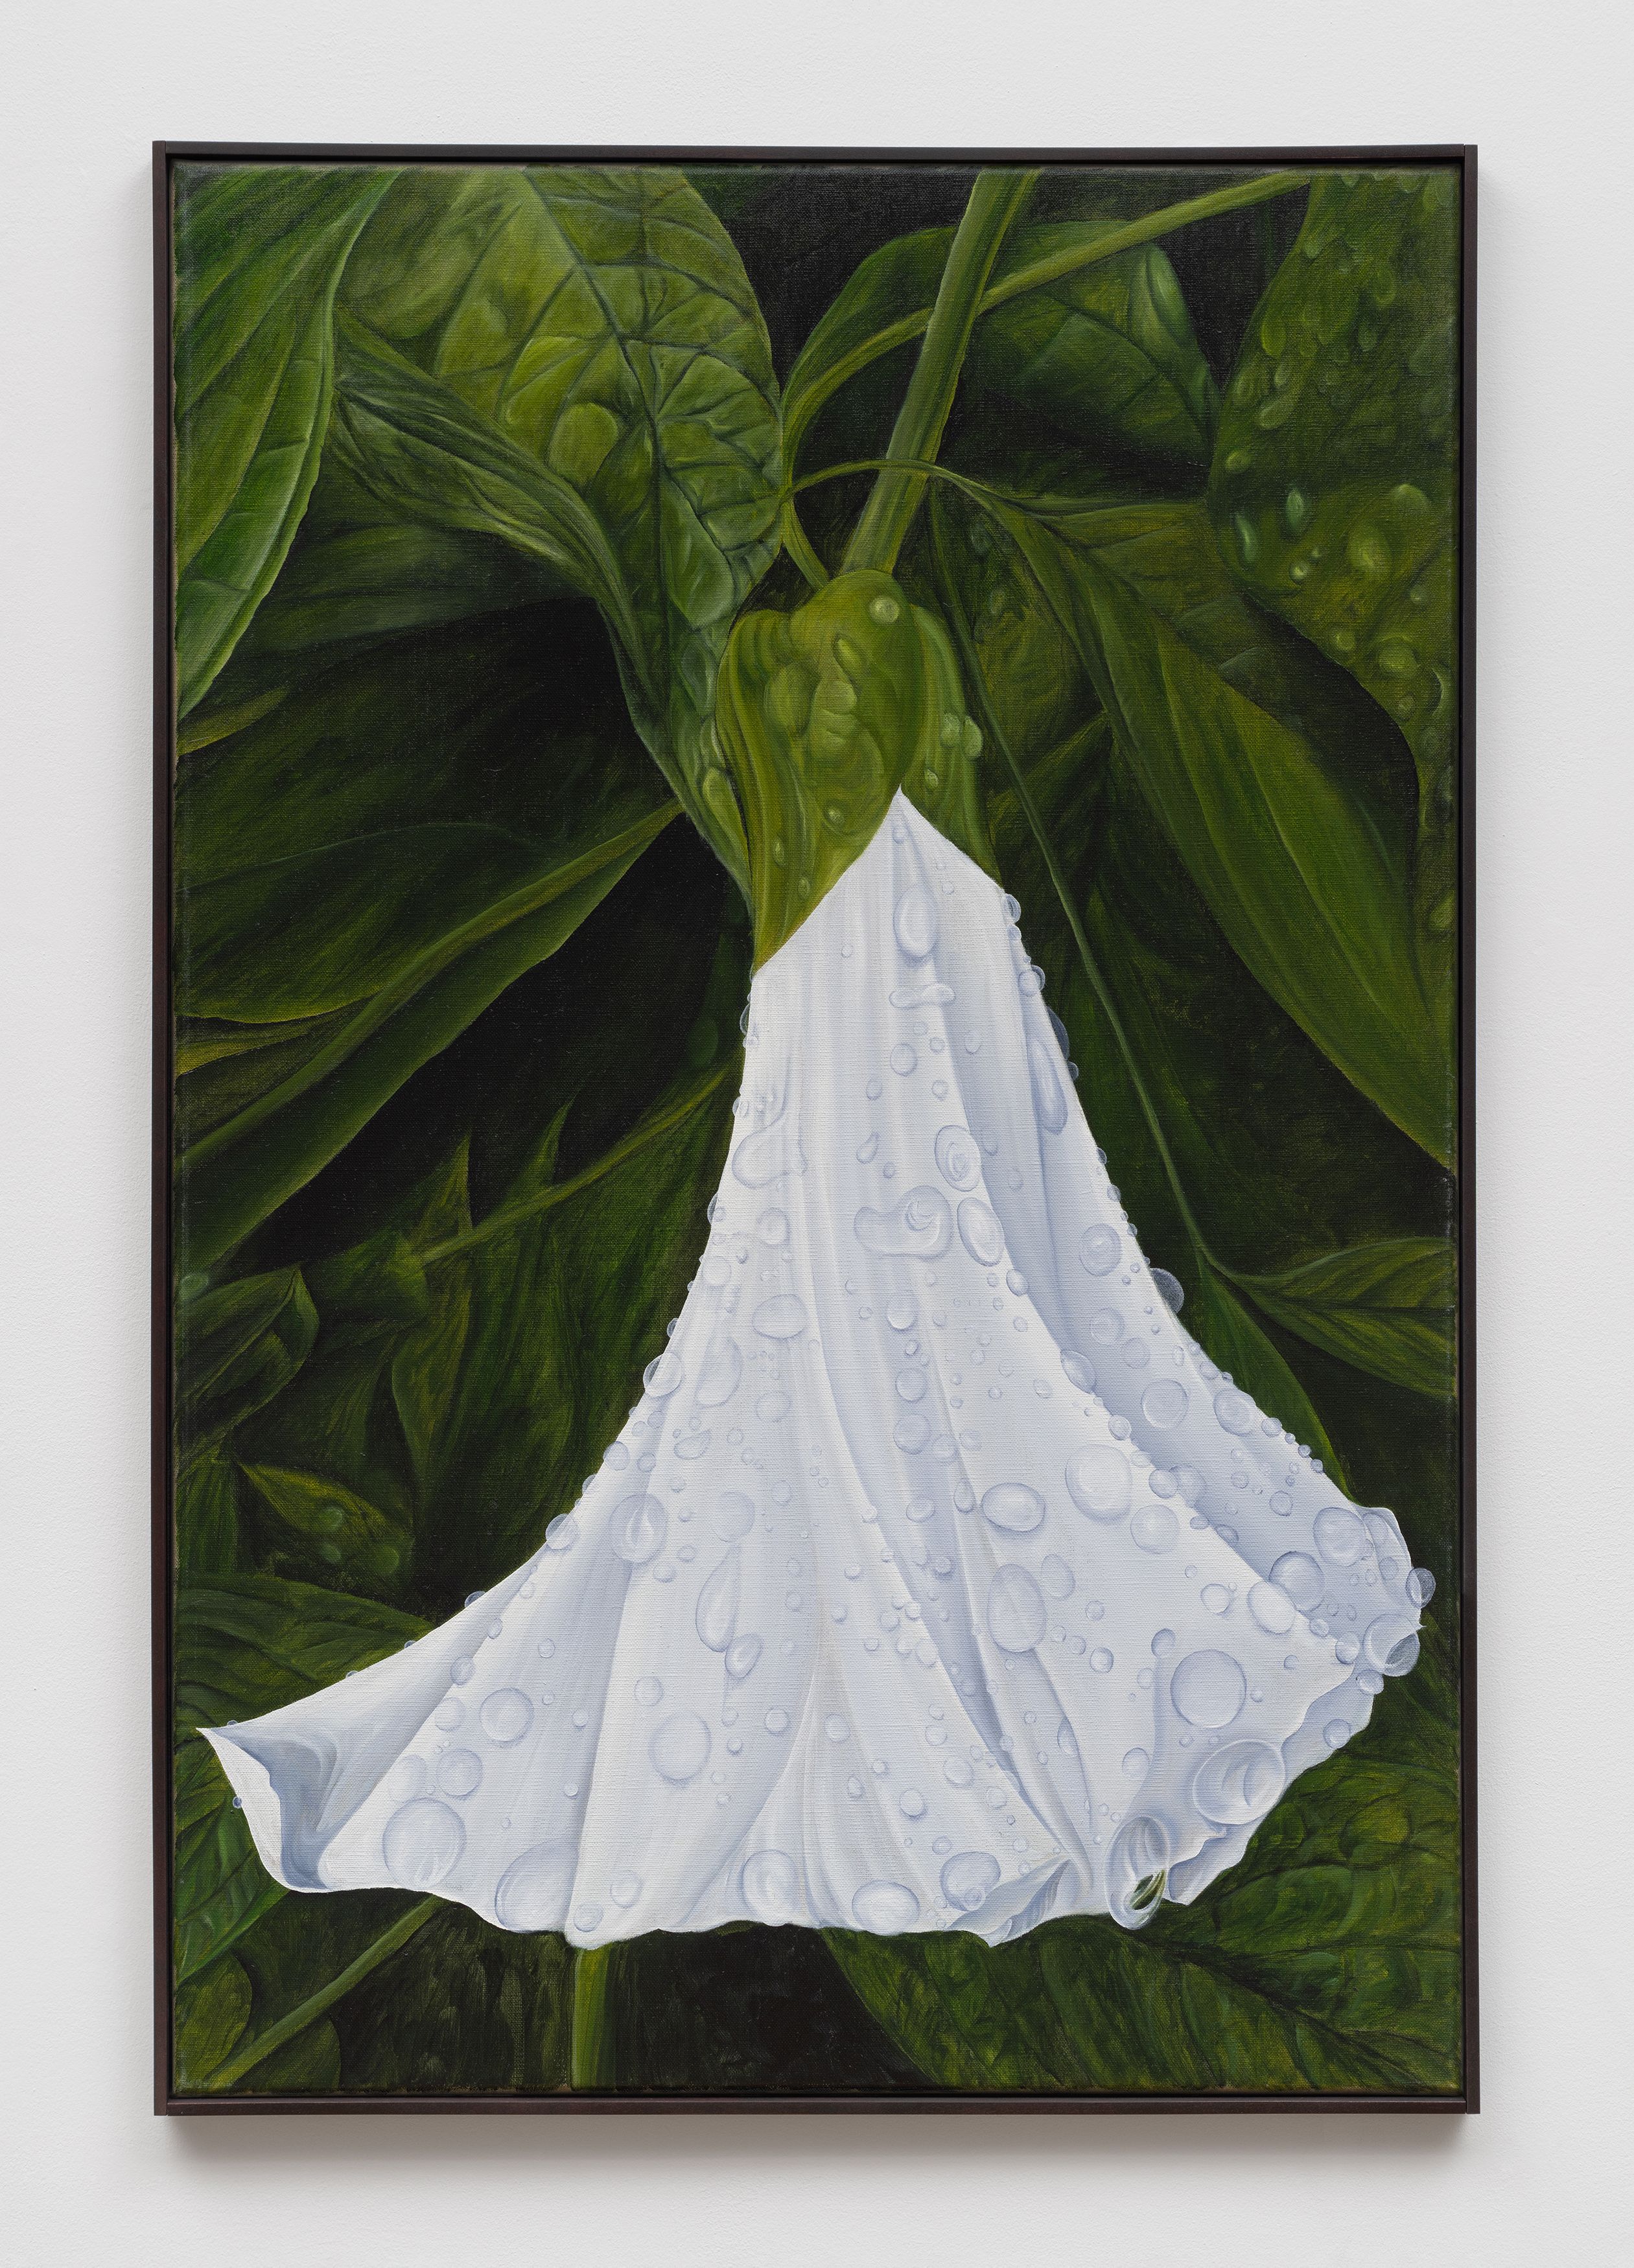 Srijon Chowdhury, Morning Glory with Dewdrops, 2021, oil on linen, 36 x 24 in. (91.44 x 60.96 cm)